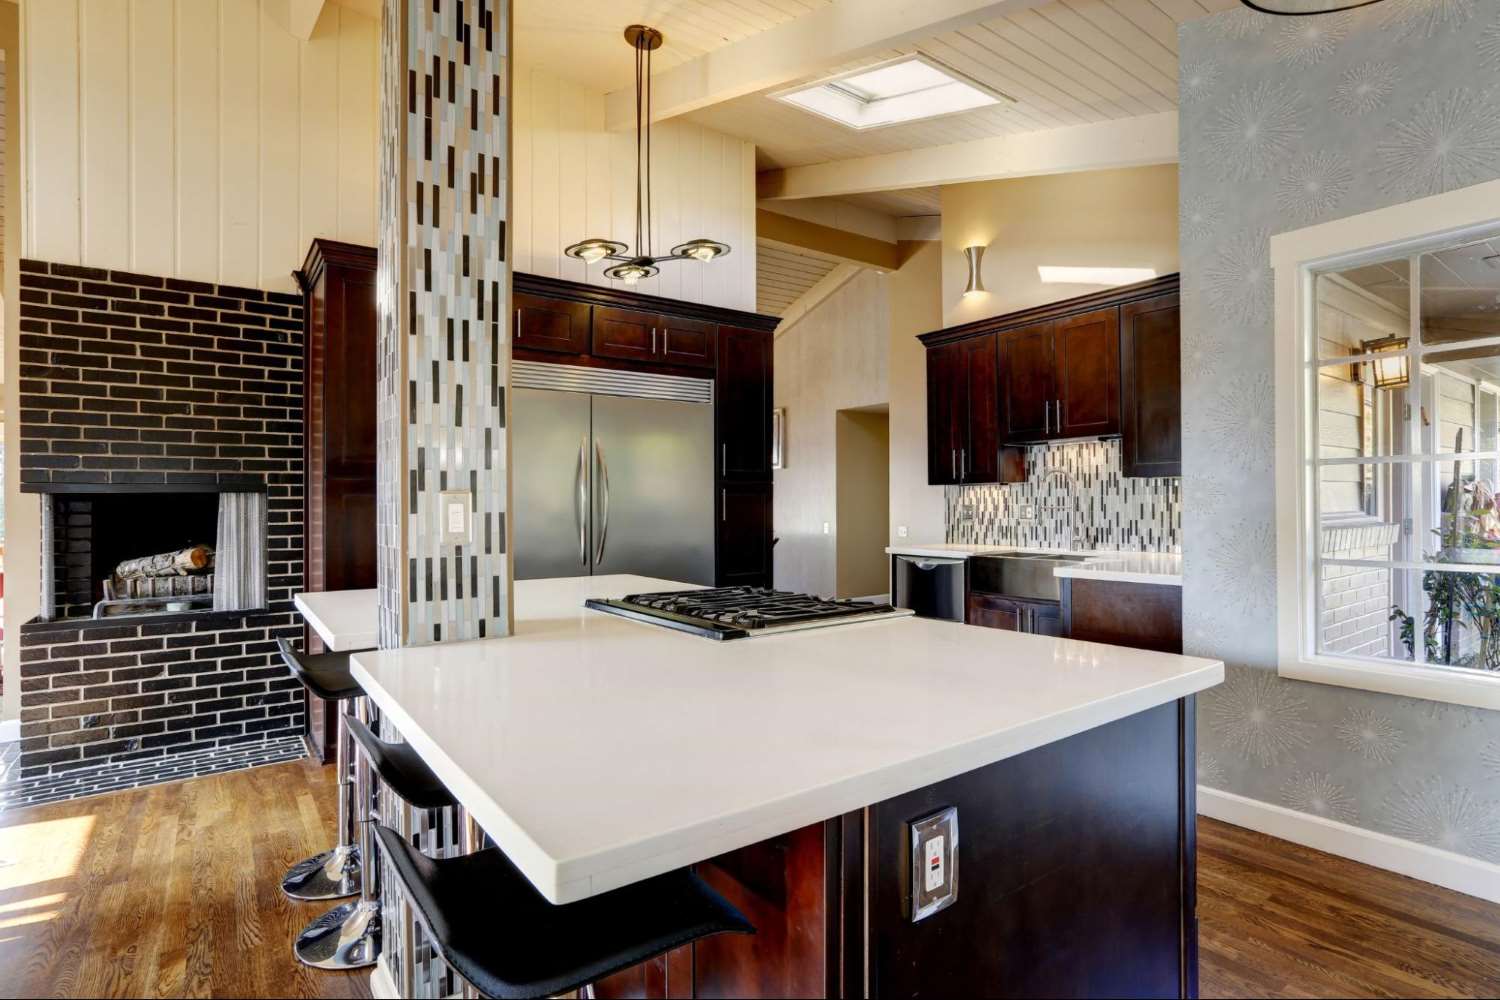 Blue Island with White Countertop and a Column in a Kitchen